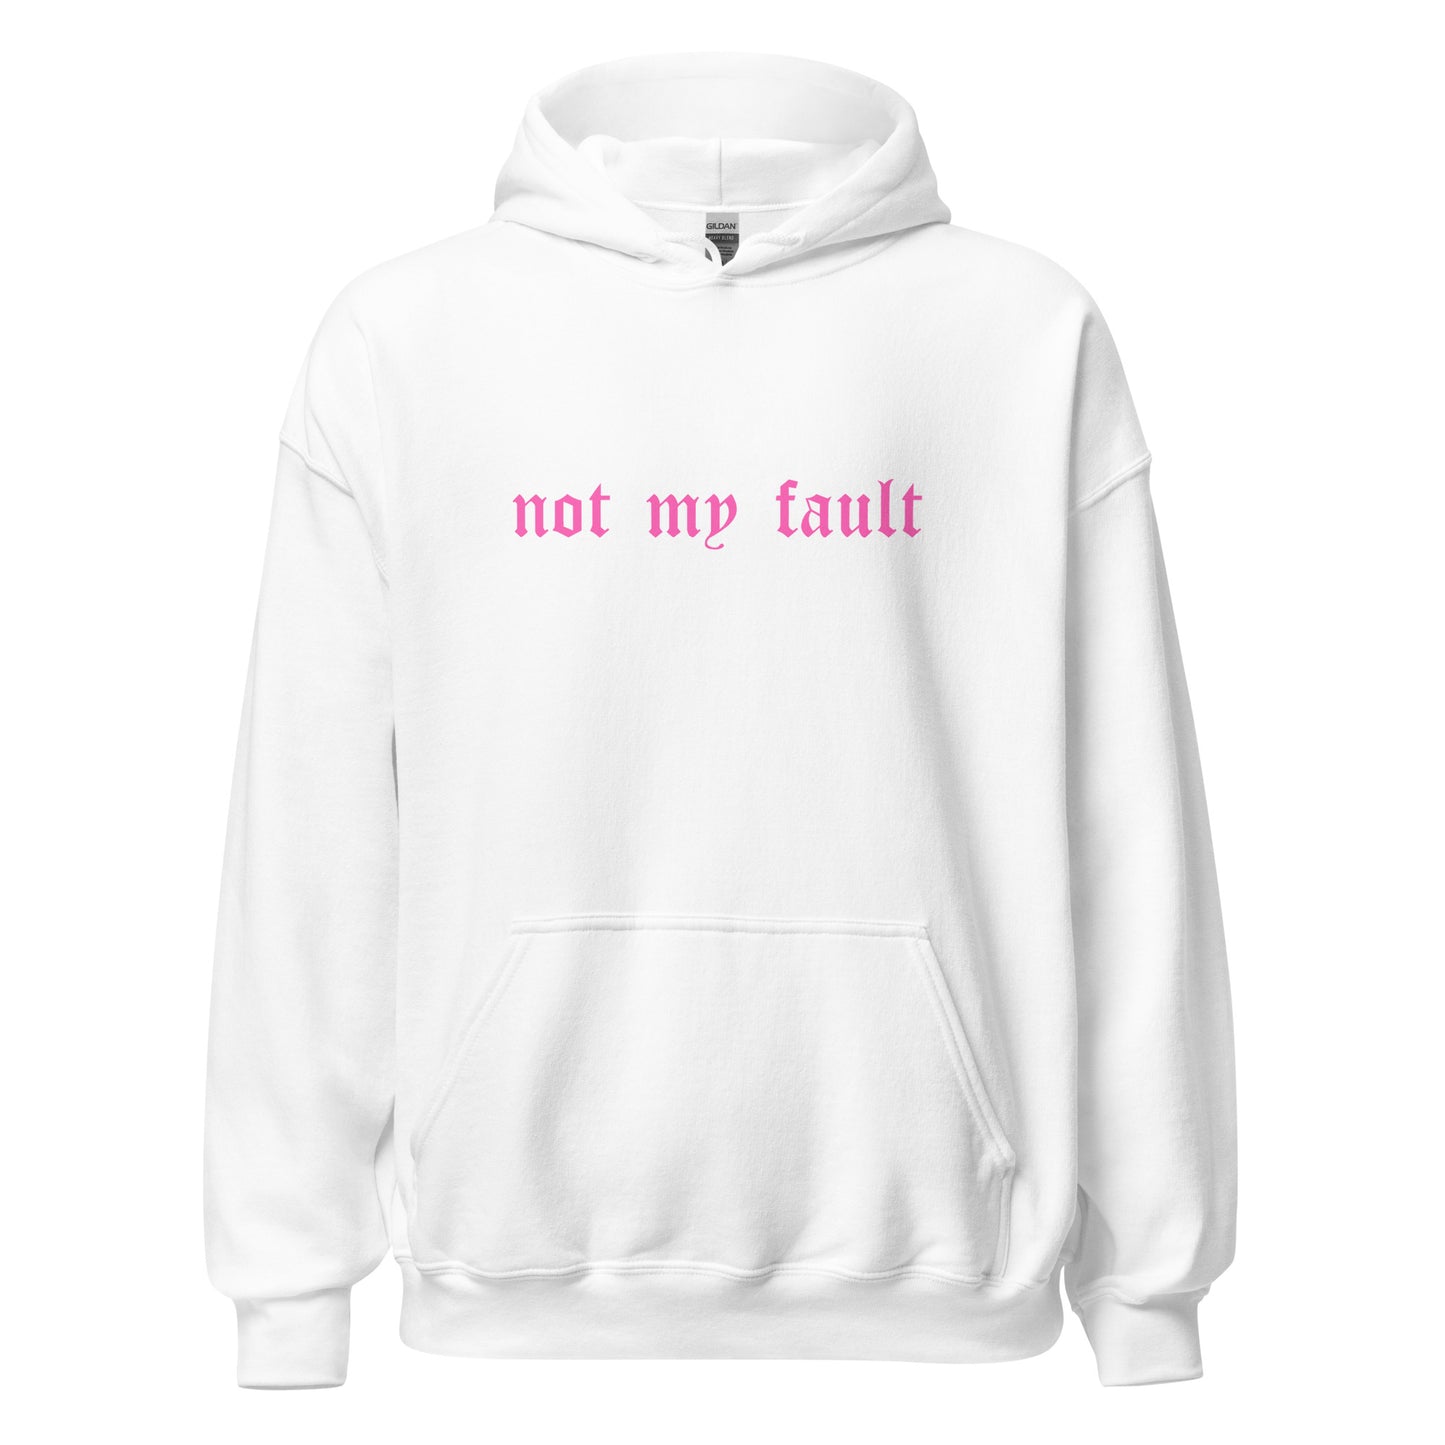 In Love With Me Hoodie (Pink Graphic)